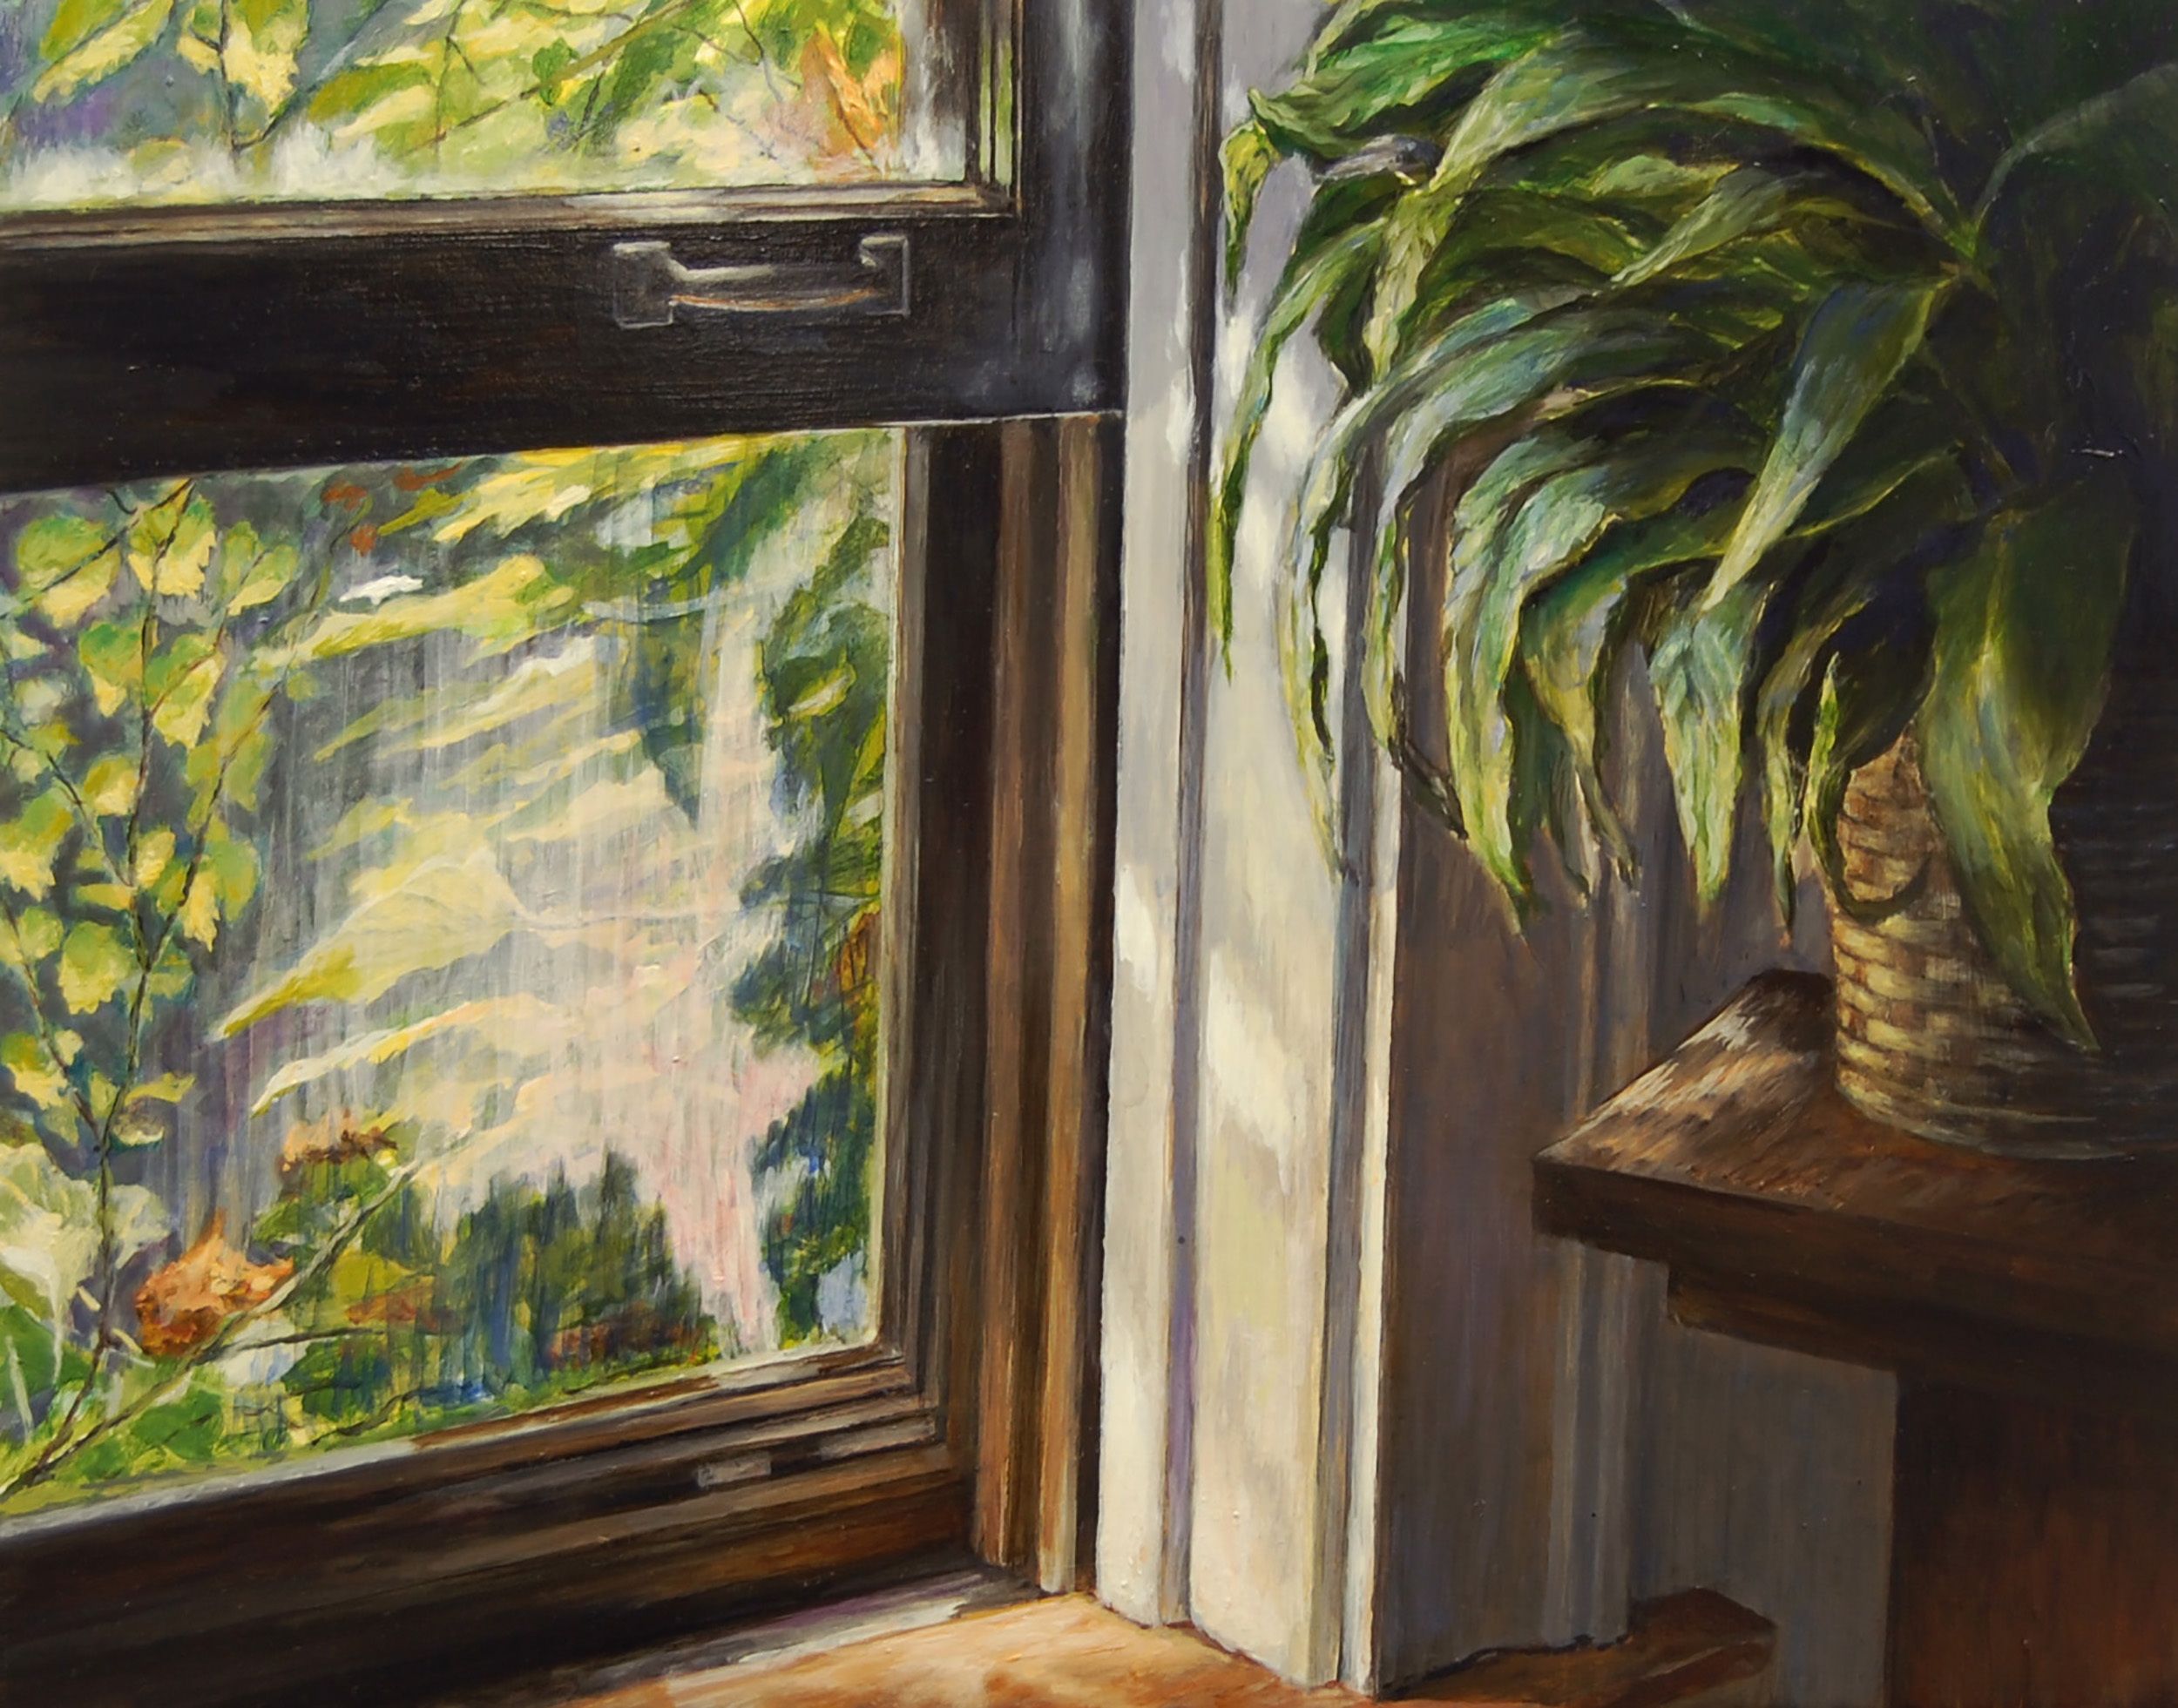   Dining Room Window     and Peace Lily   2011  Oil on canvas  11 x 14 inches    